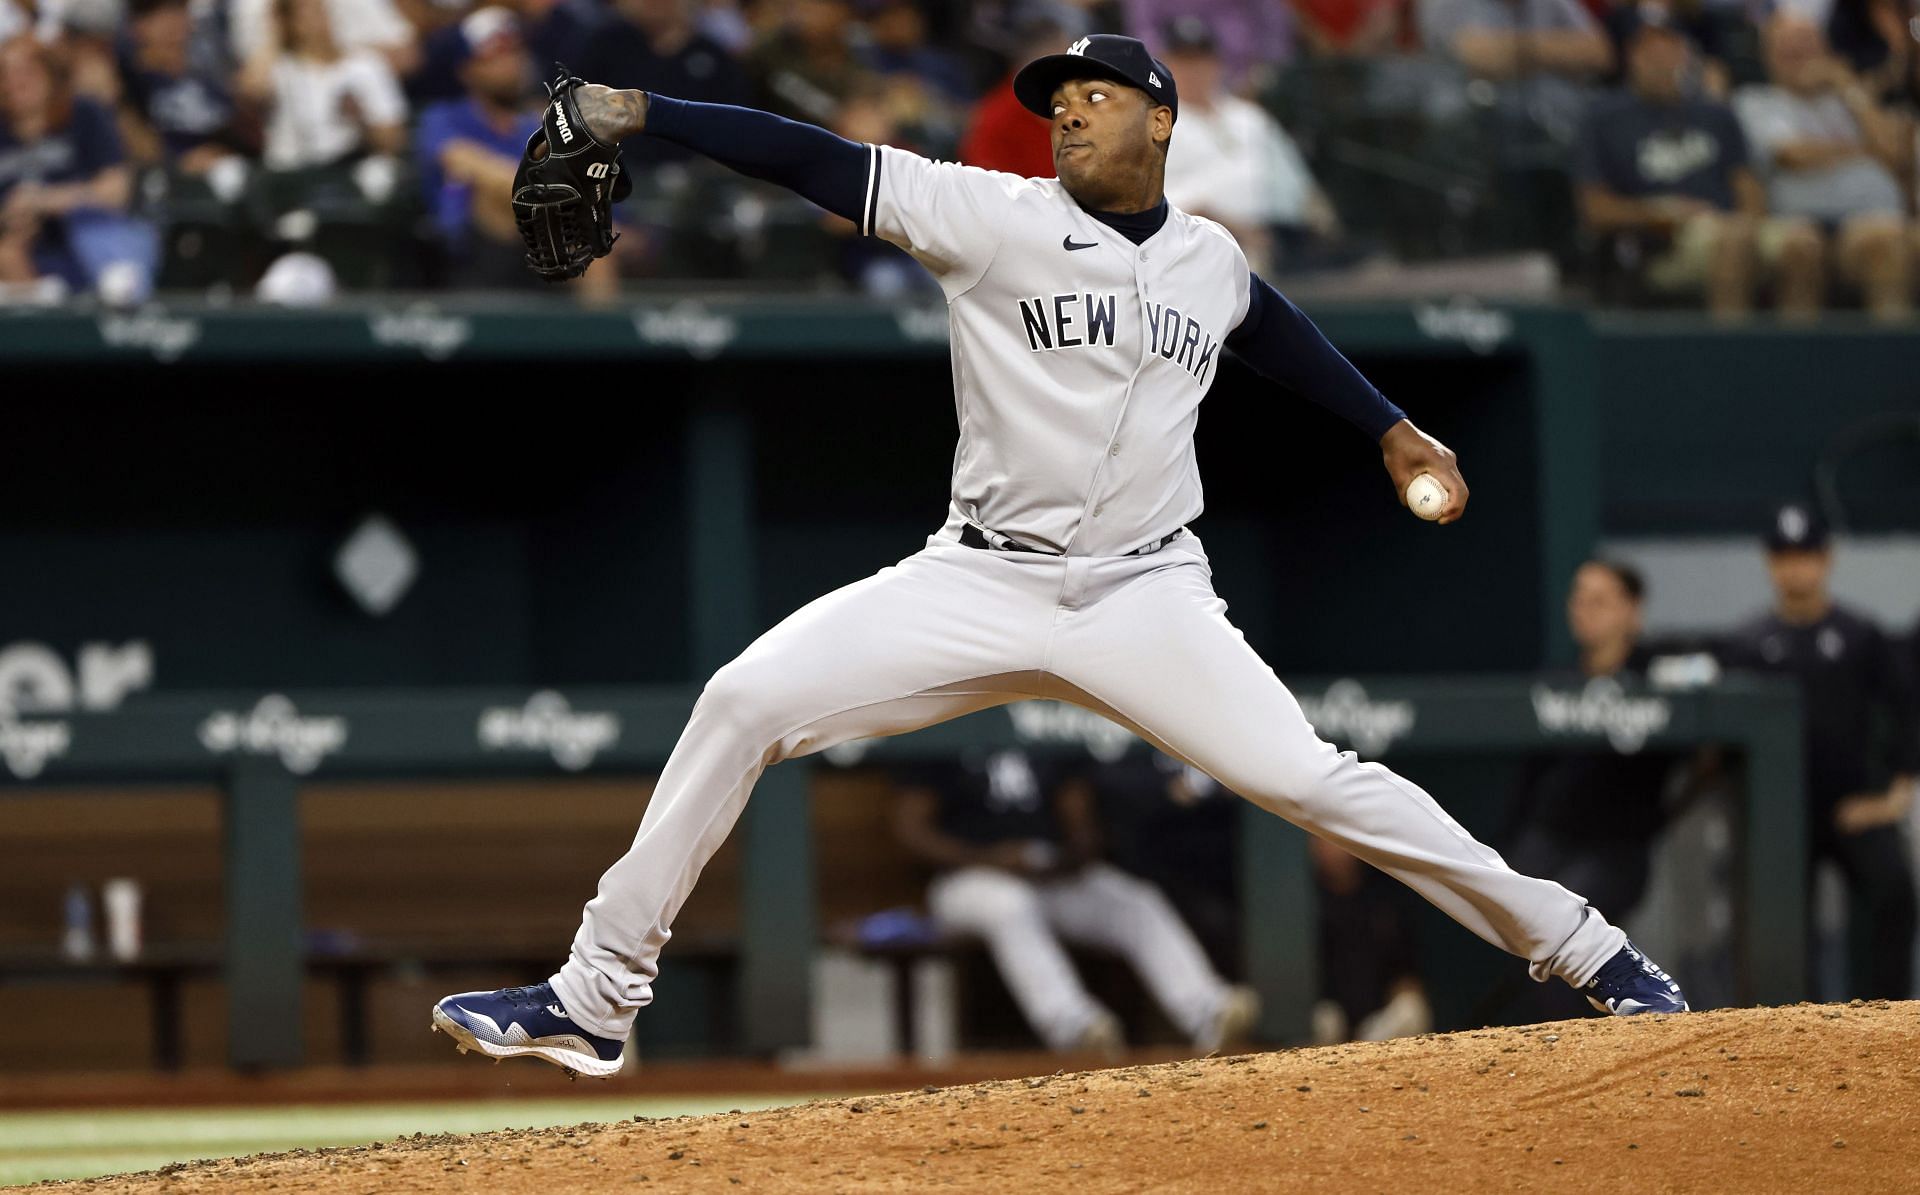 The Aroldis Chapman era appears to finally be over